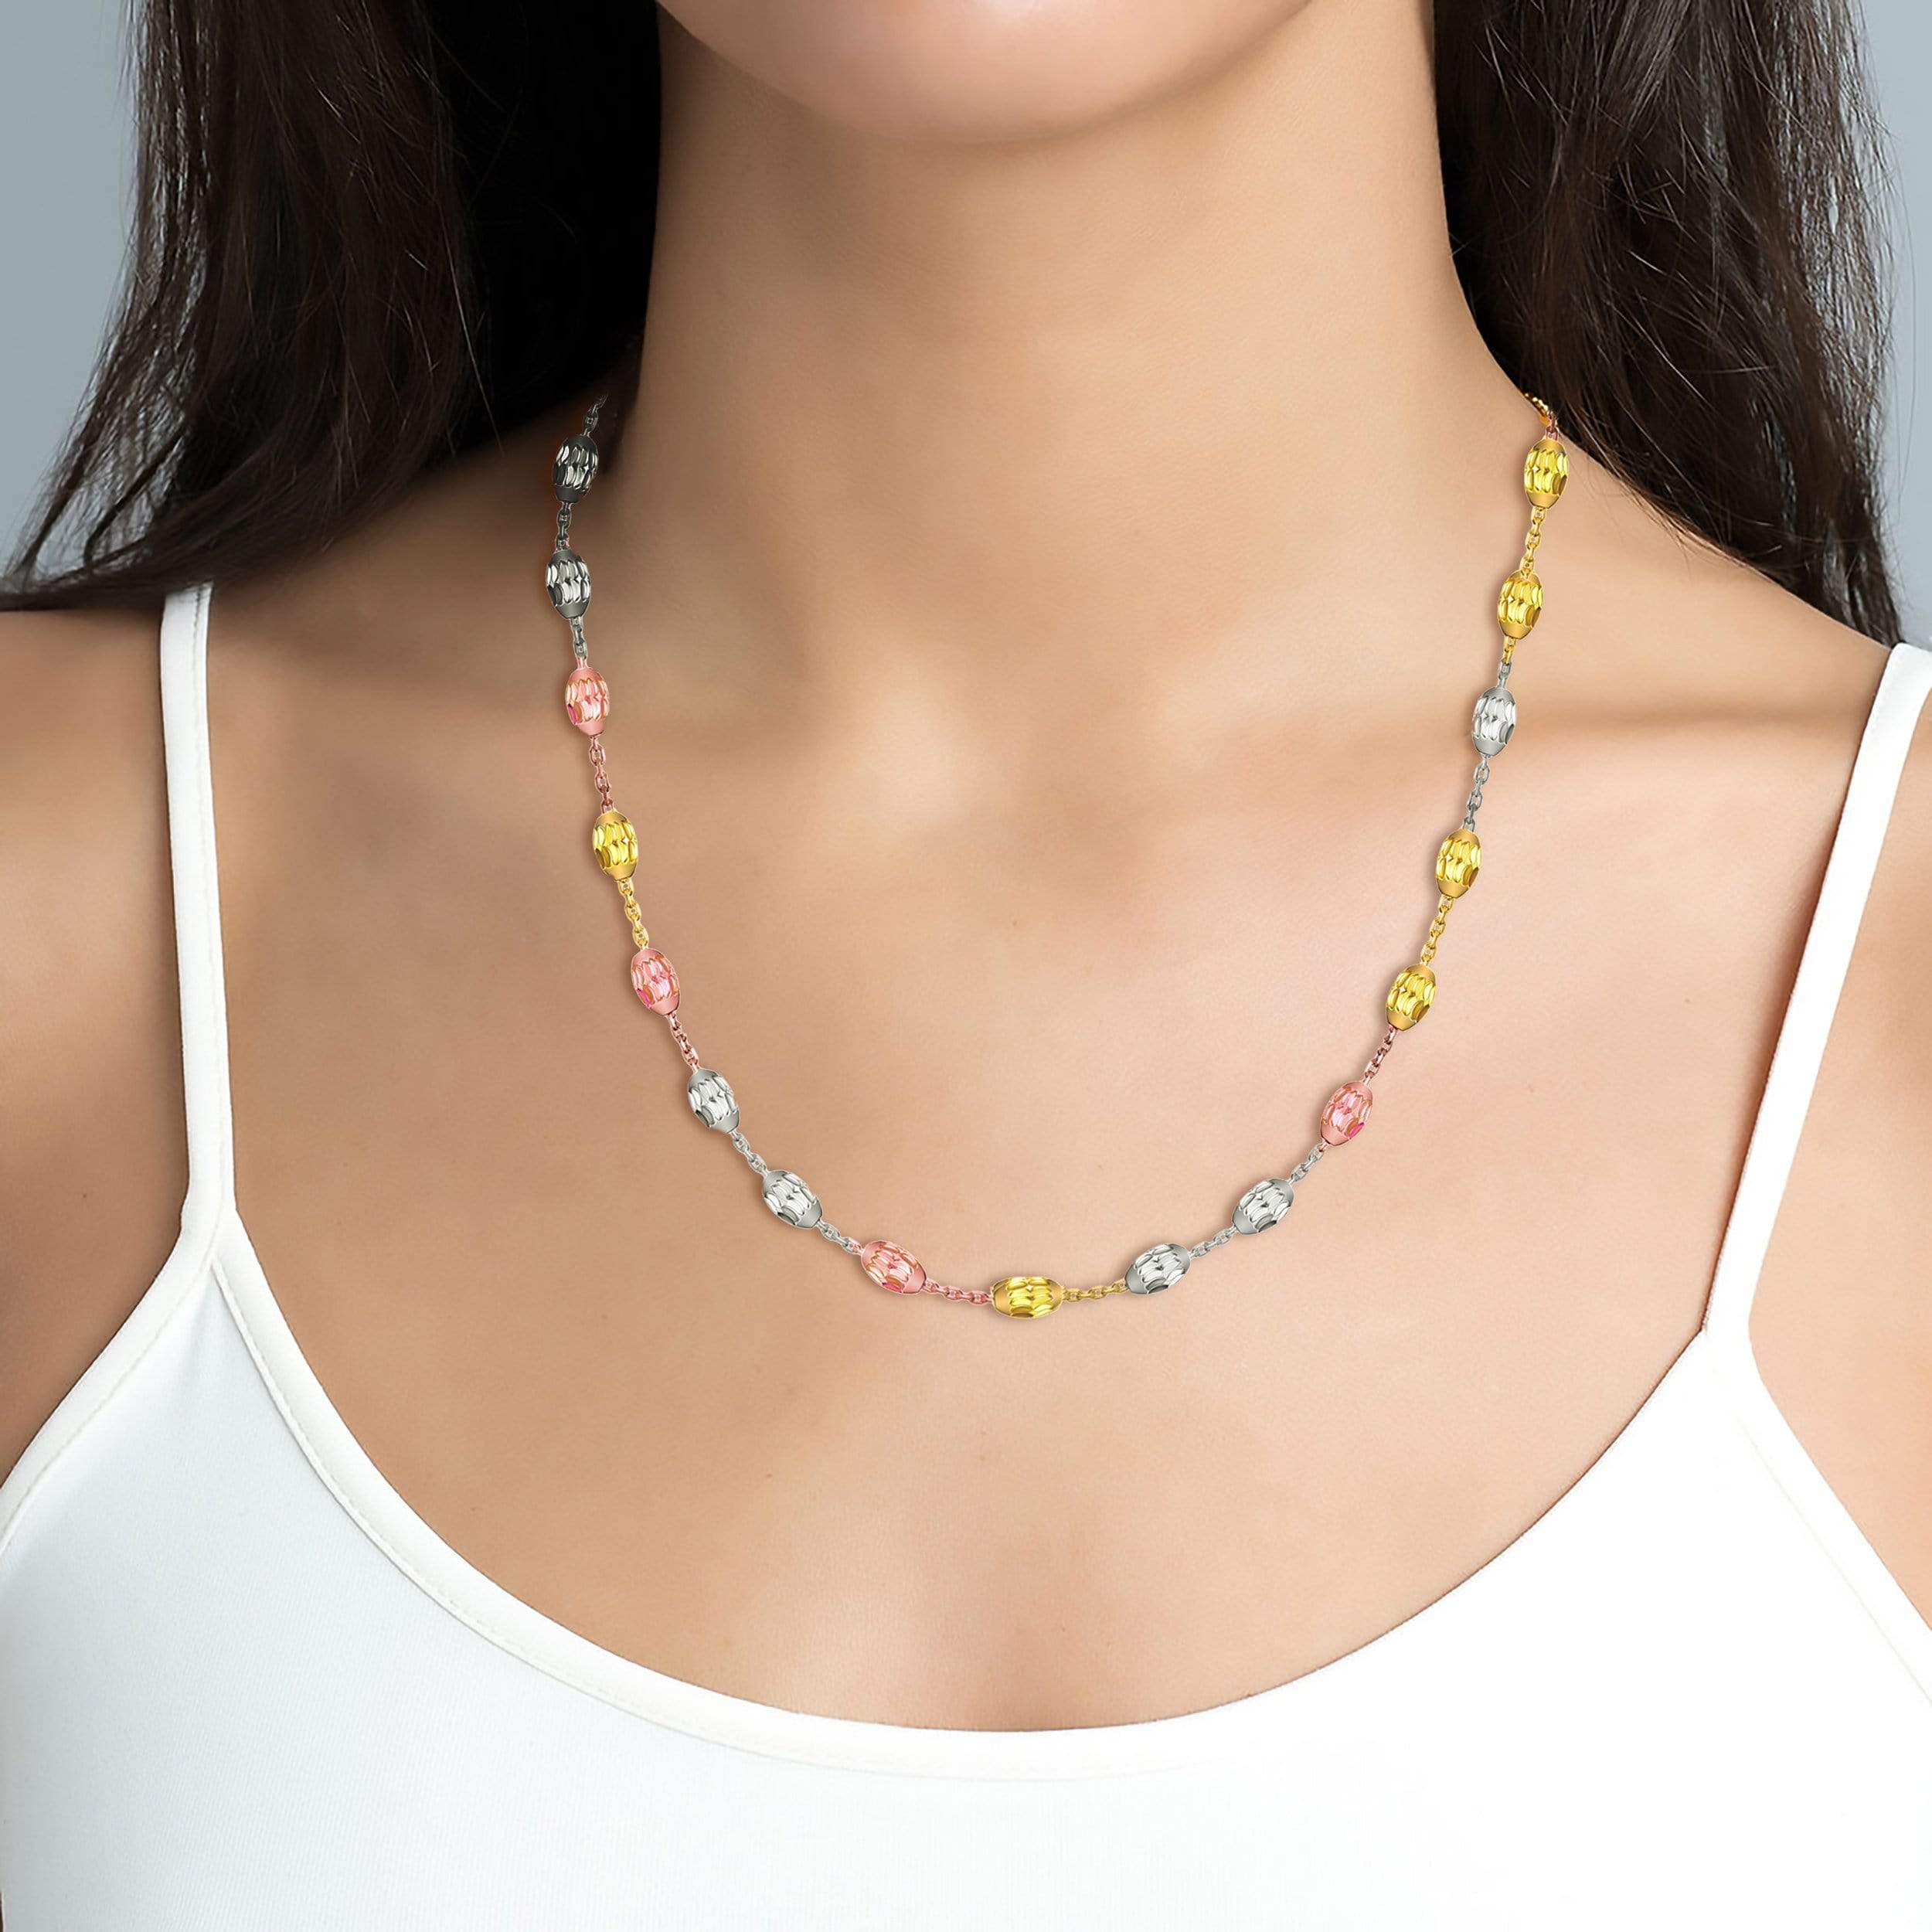 Lynora Jewellery Necklace 20" / Mixed Metals Geobeads Mixed Necklace Yellow Gold Plate